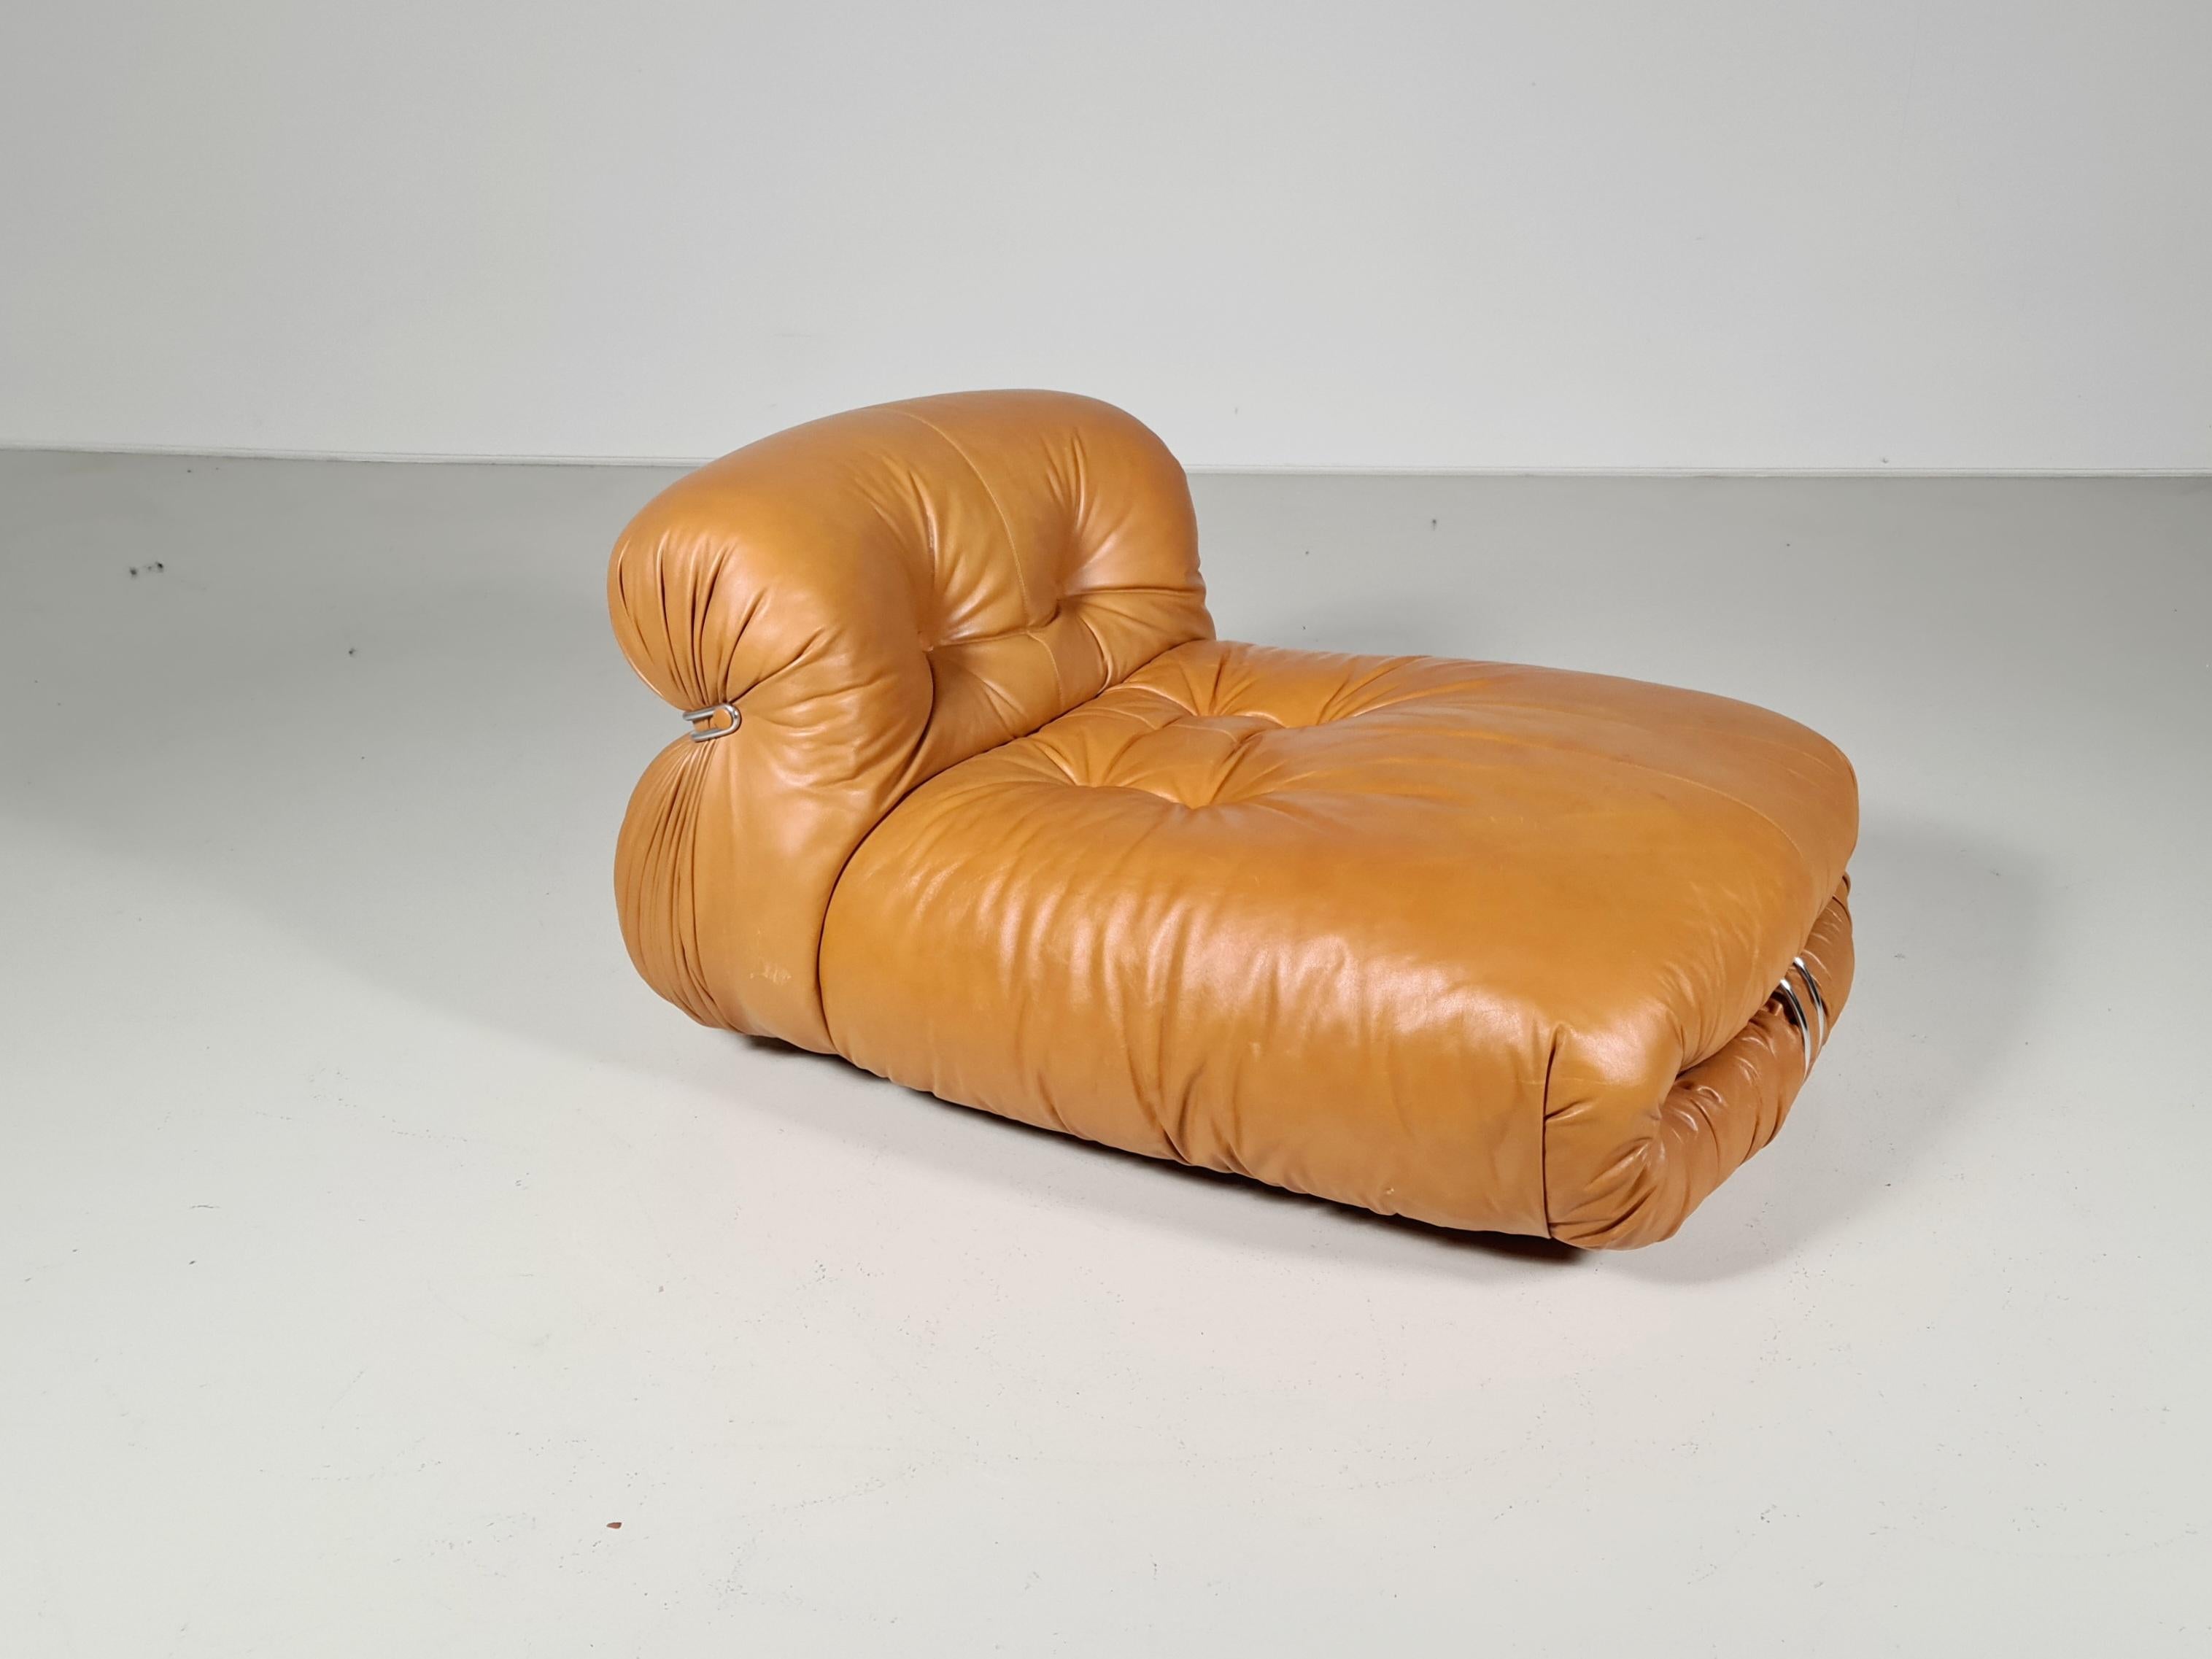 Rare Soriana chaise longue/lounger by Afra & Tobia Scarpa for Cassina, Italy, 1970, The original light cognac leather and foam are in very good condition and shows it’s characteristic round and bulky shape. The concept behind the Soriana series was